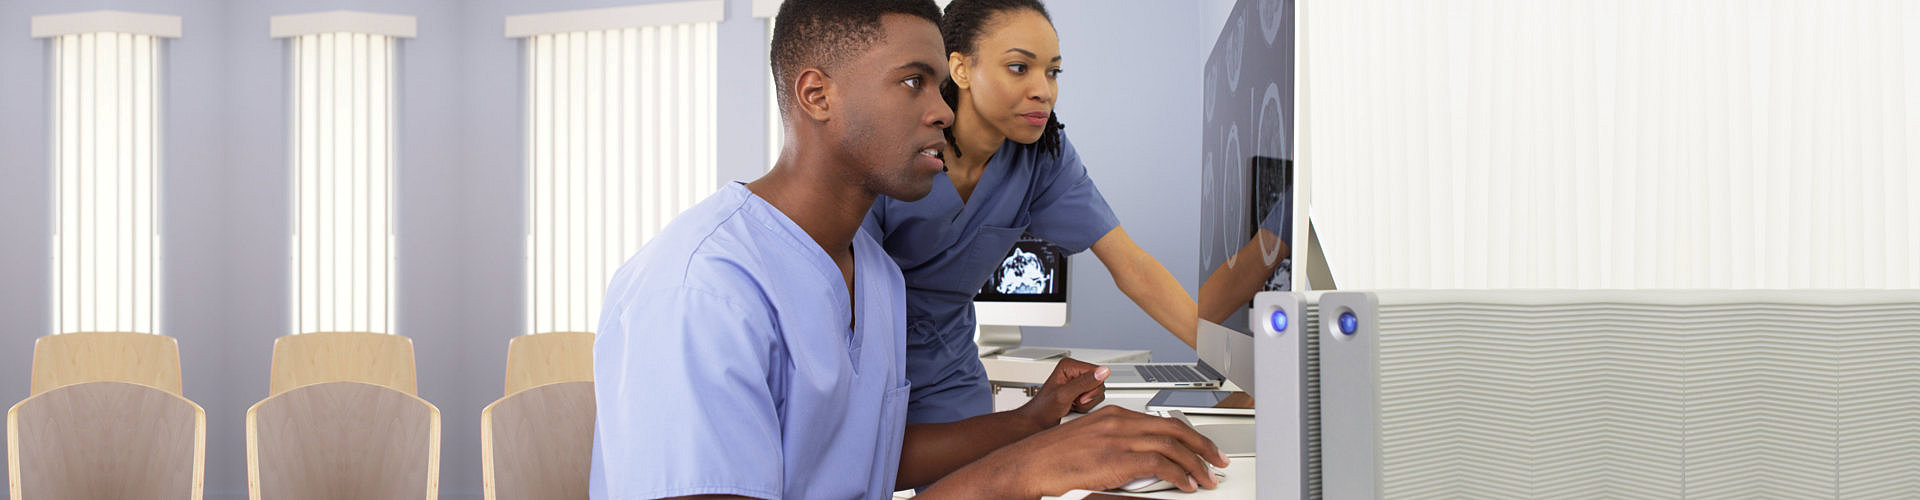 Two African American medical specialists working together on computer